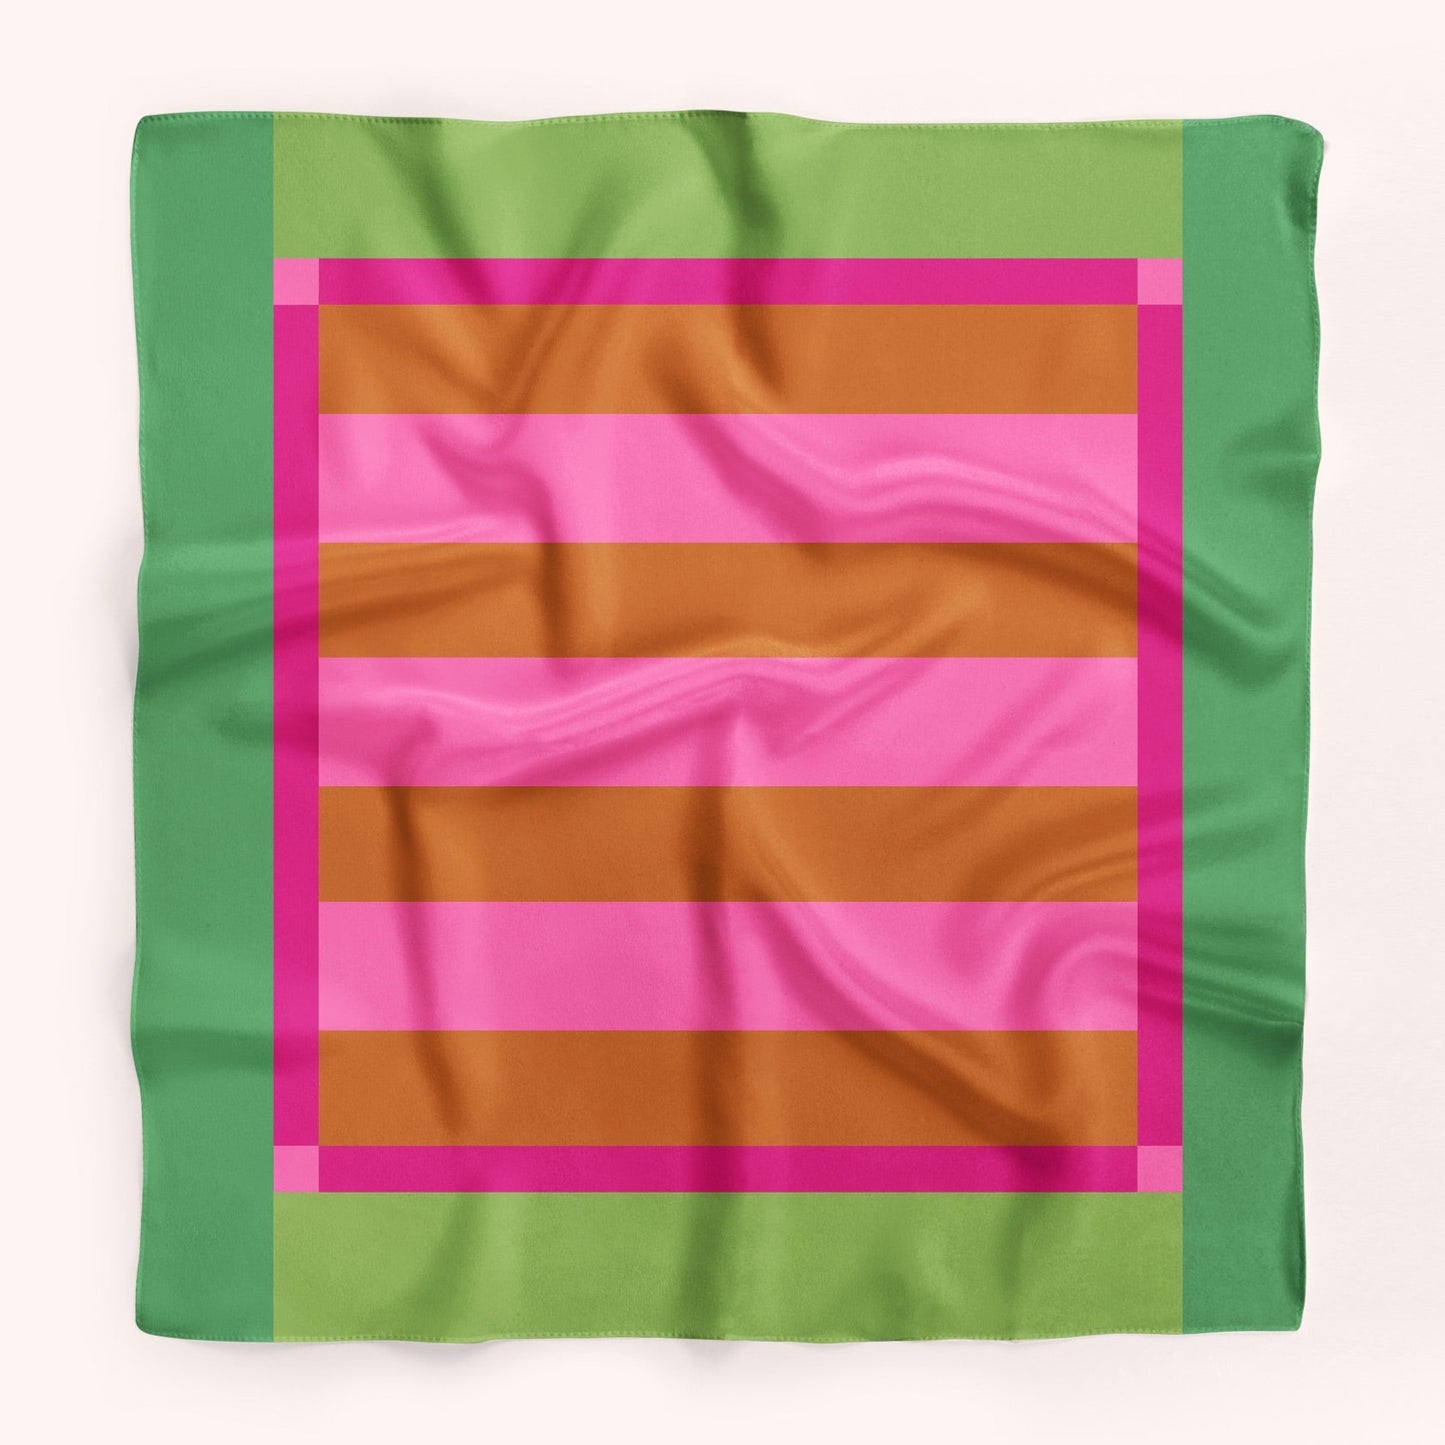 Picnic - color block silk charmeuse scarf in pink and green